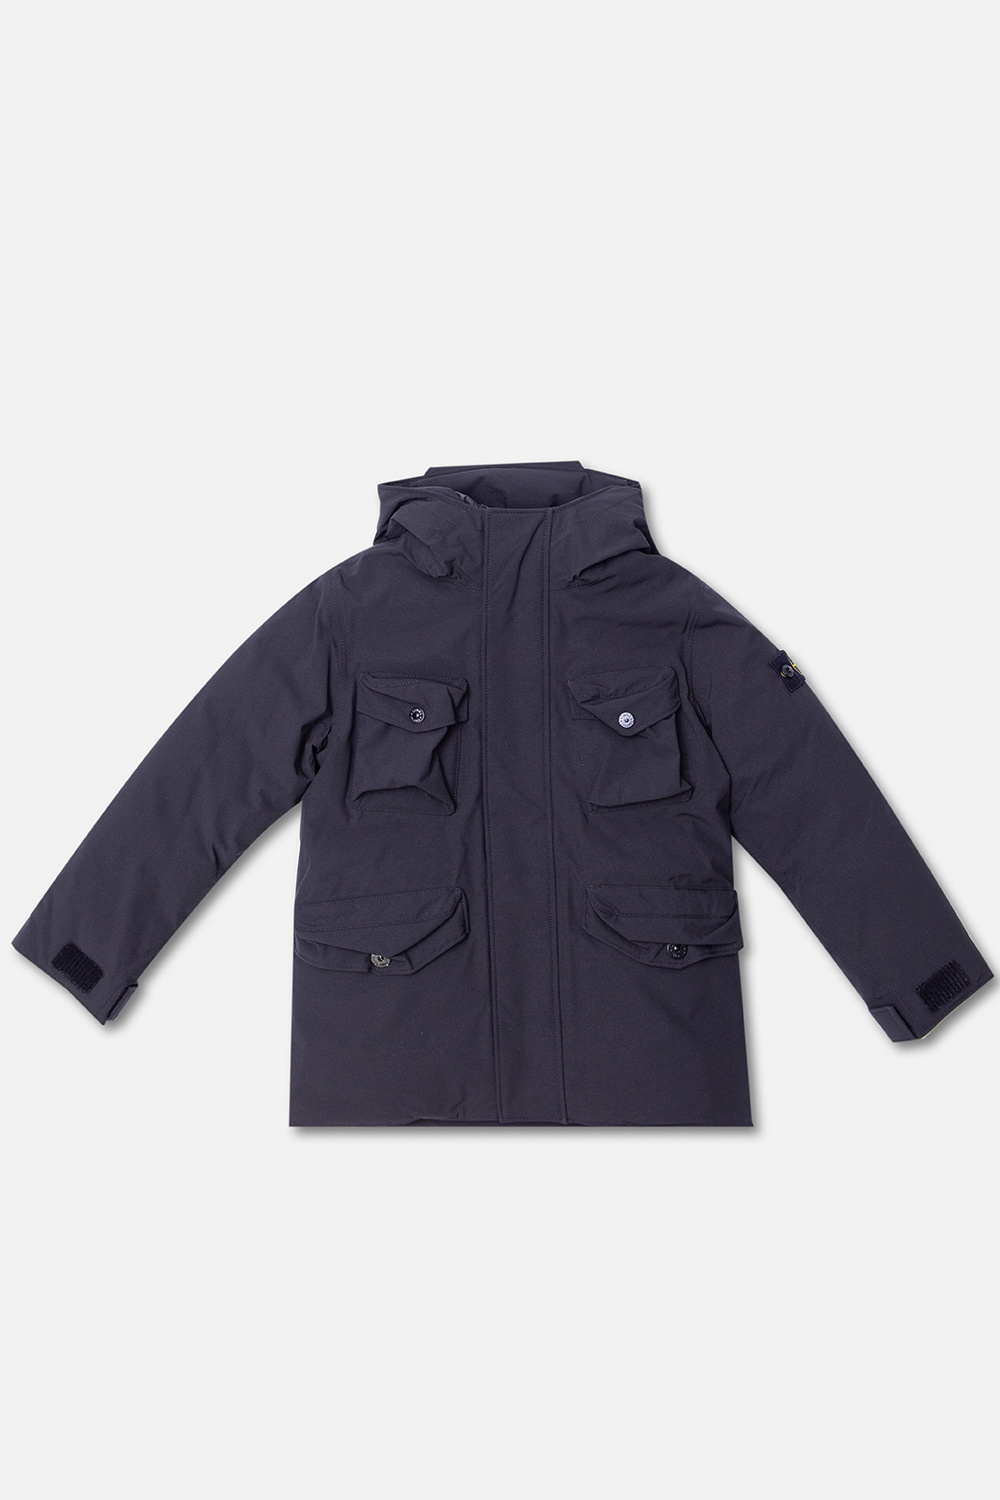 creased effect bow tie shirt Down jacket